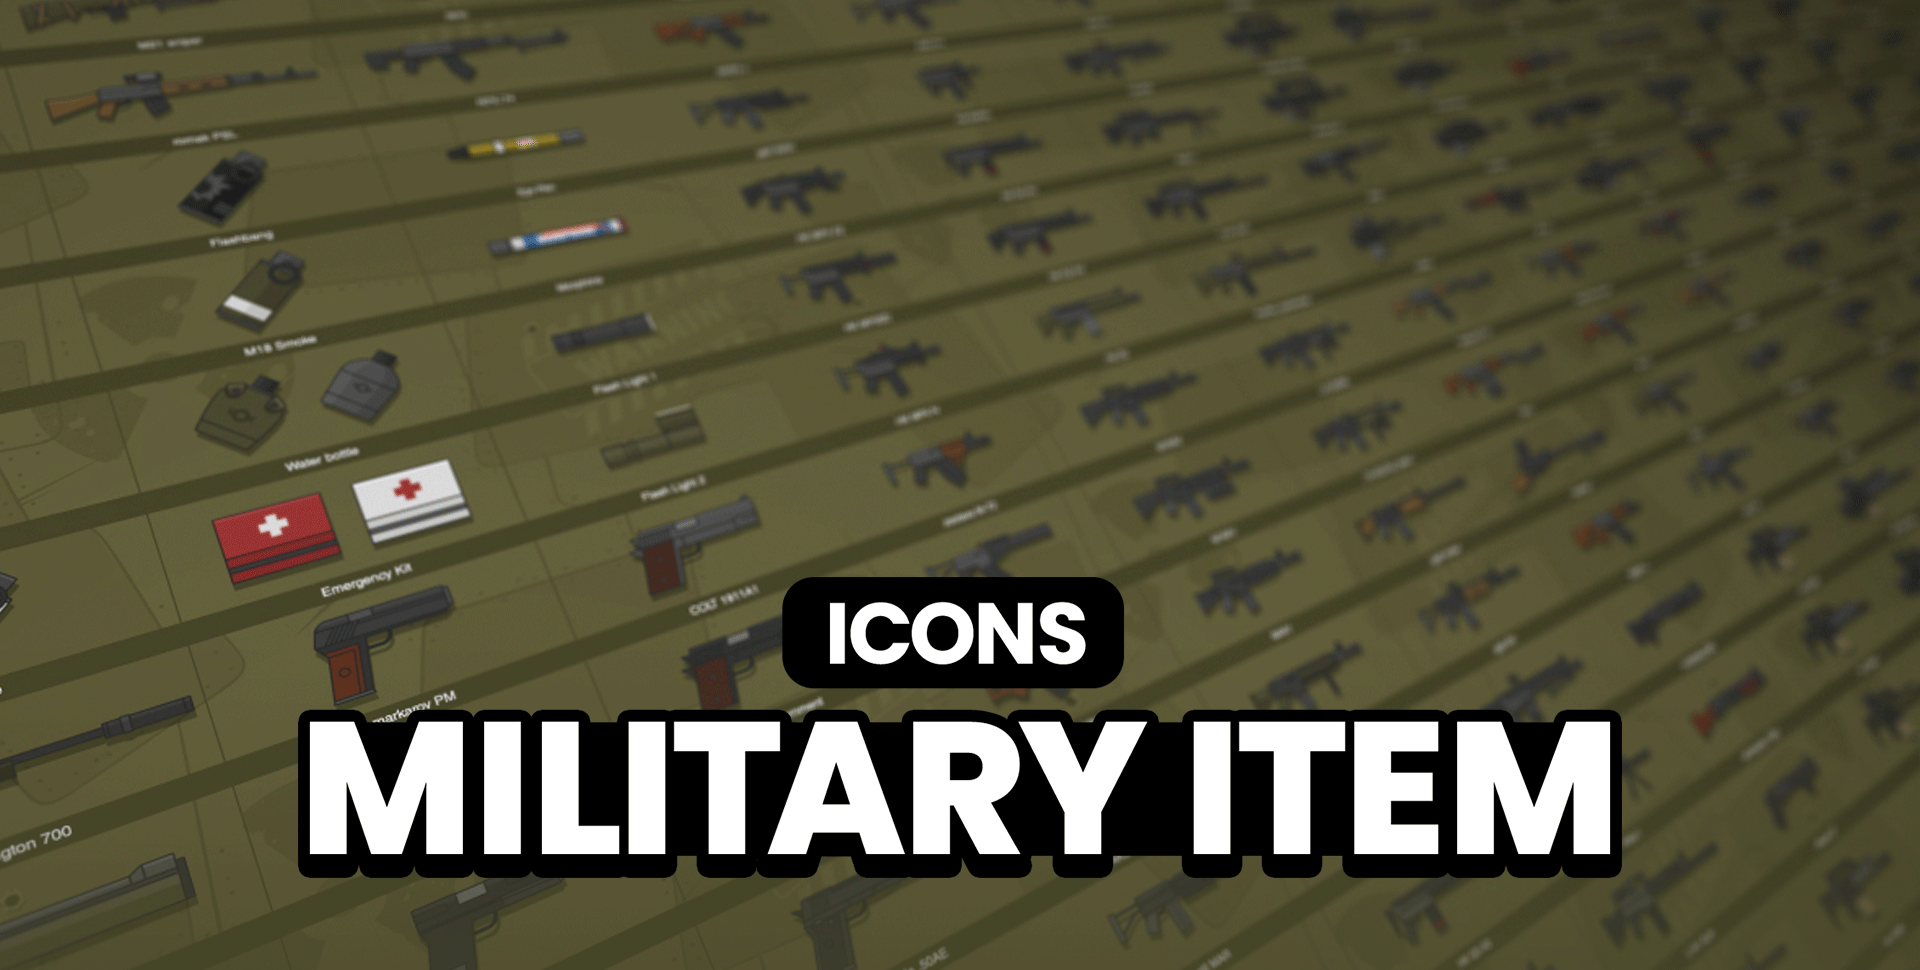 2D Icons - Military Item